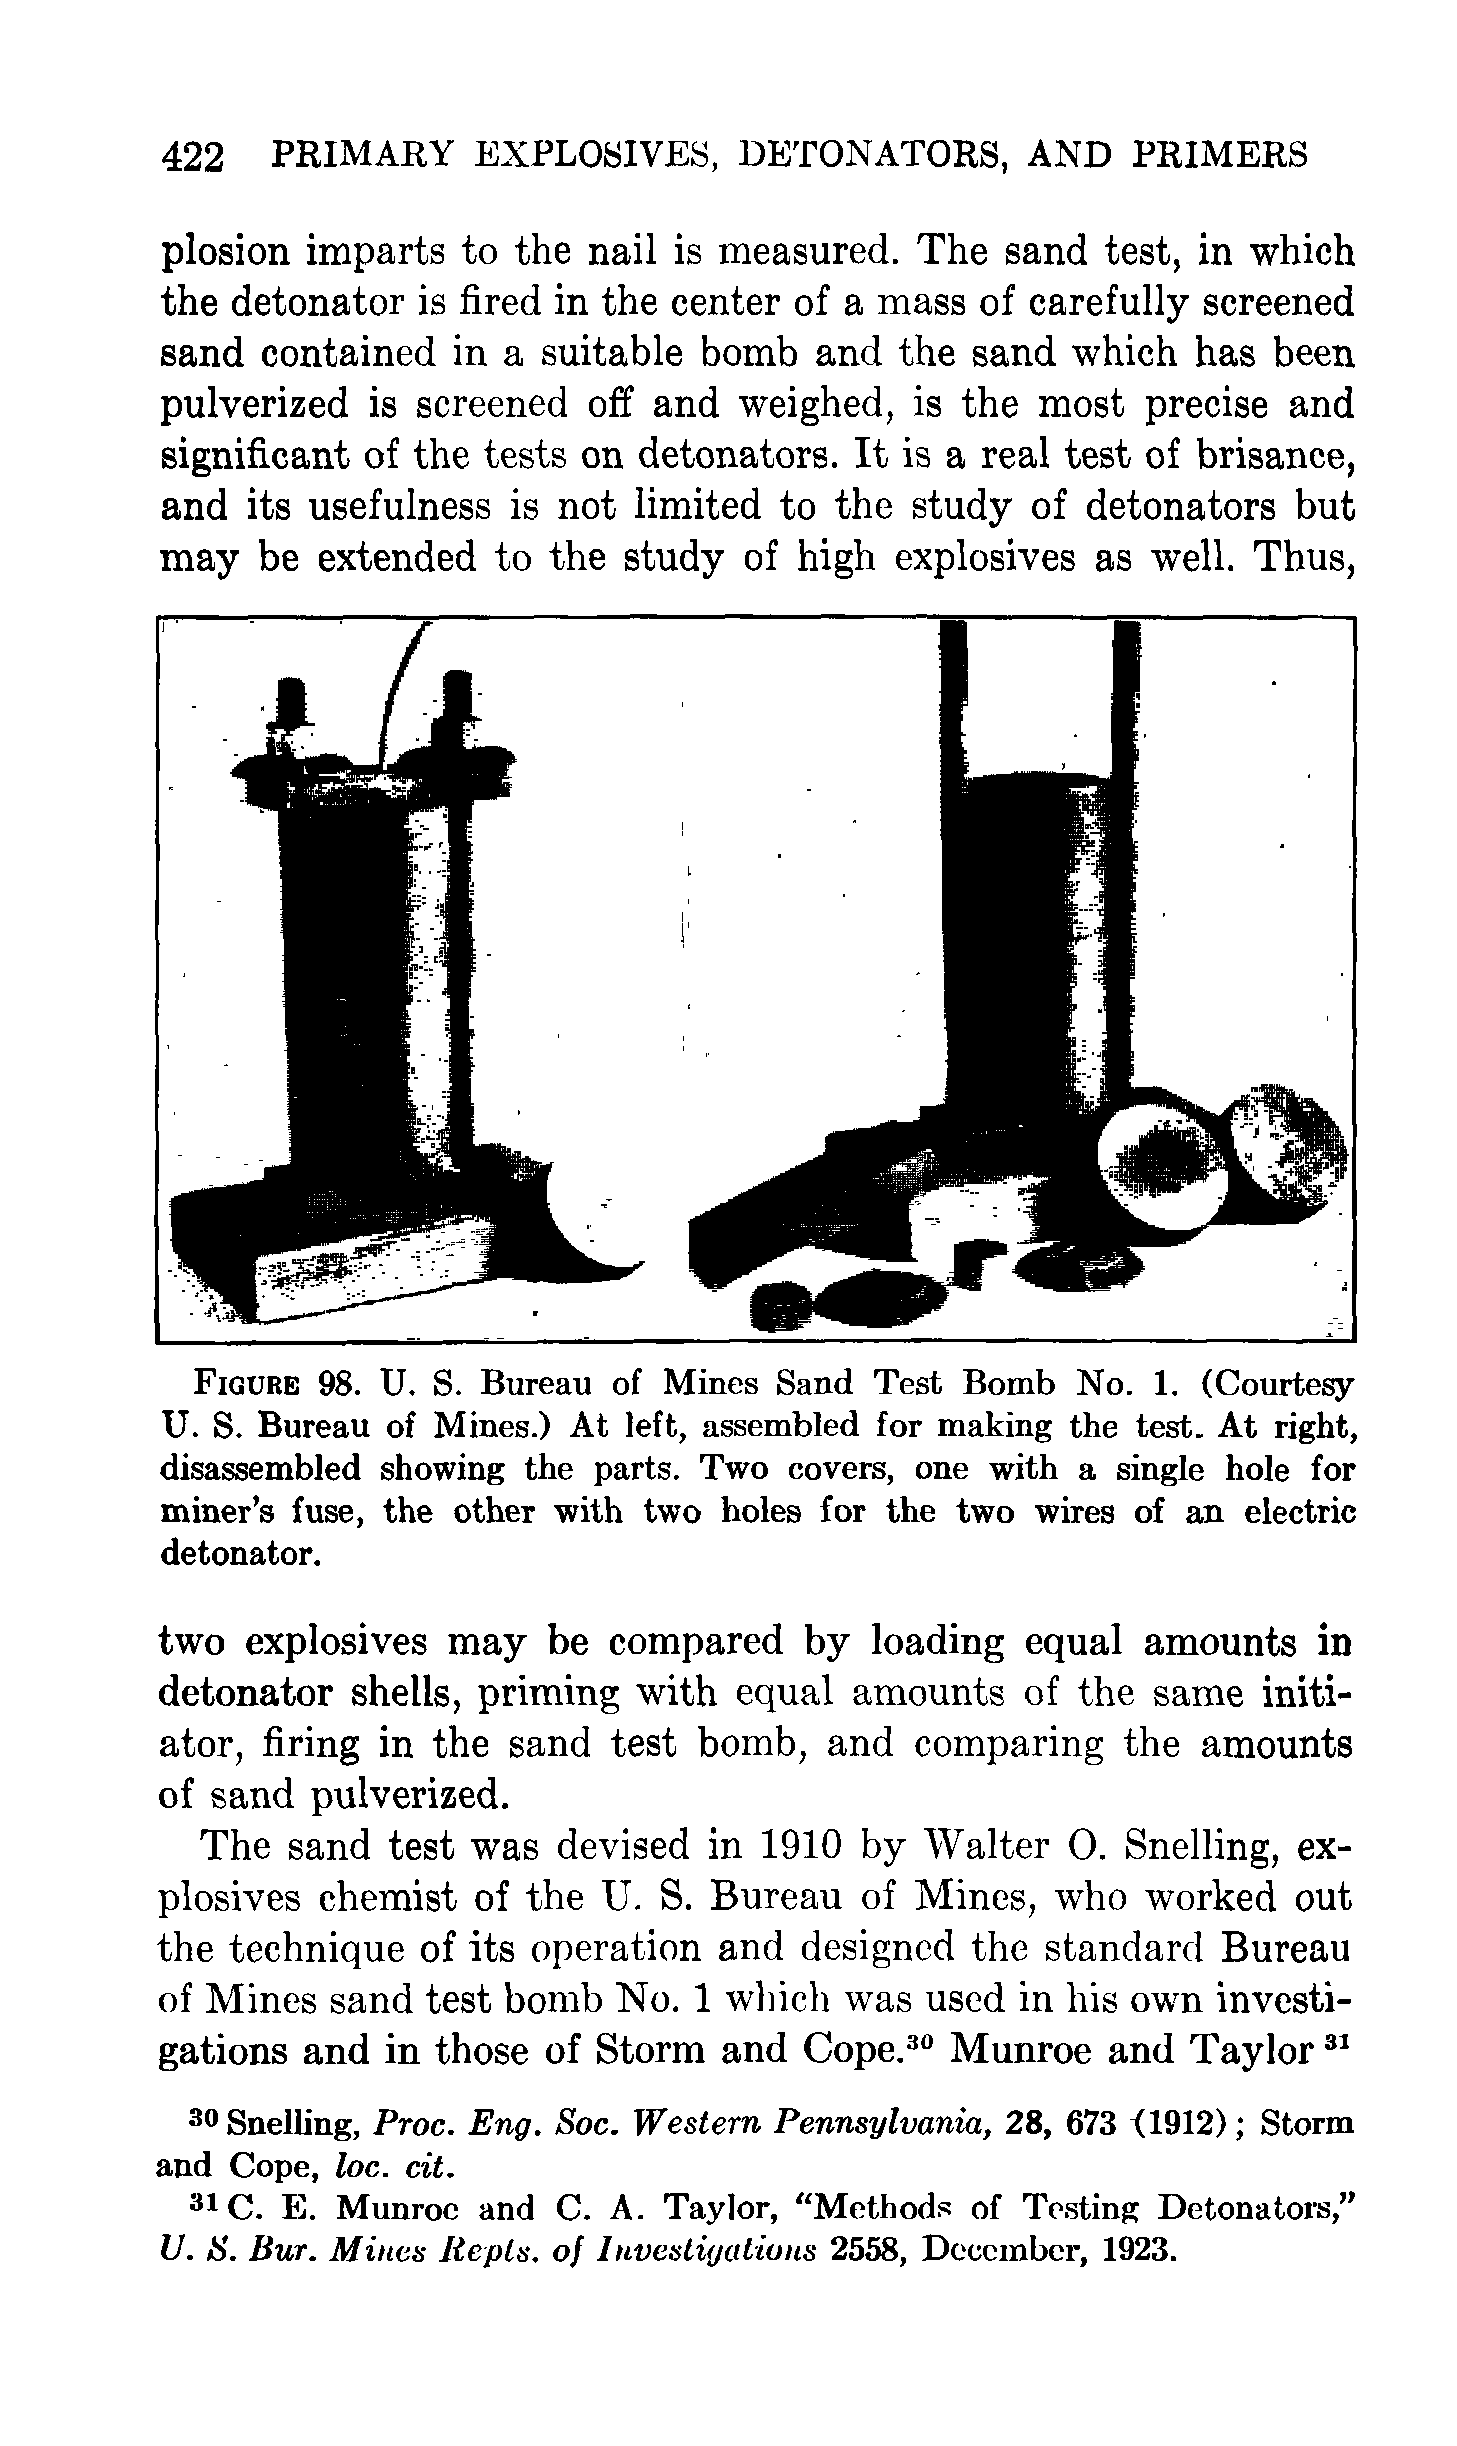 Figure 98. U. S. Bureau of Mines Sand Test Bomb No. 1. (Courtesy U. S. Bureau of Mines.) At left, assembled for making the test. At right, disassembled showing the parts. Two covers, one with a single hole for miner s fuse, the other with two holes for the two wires of an electric detonator.